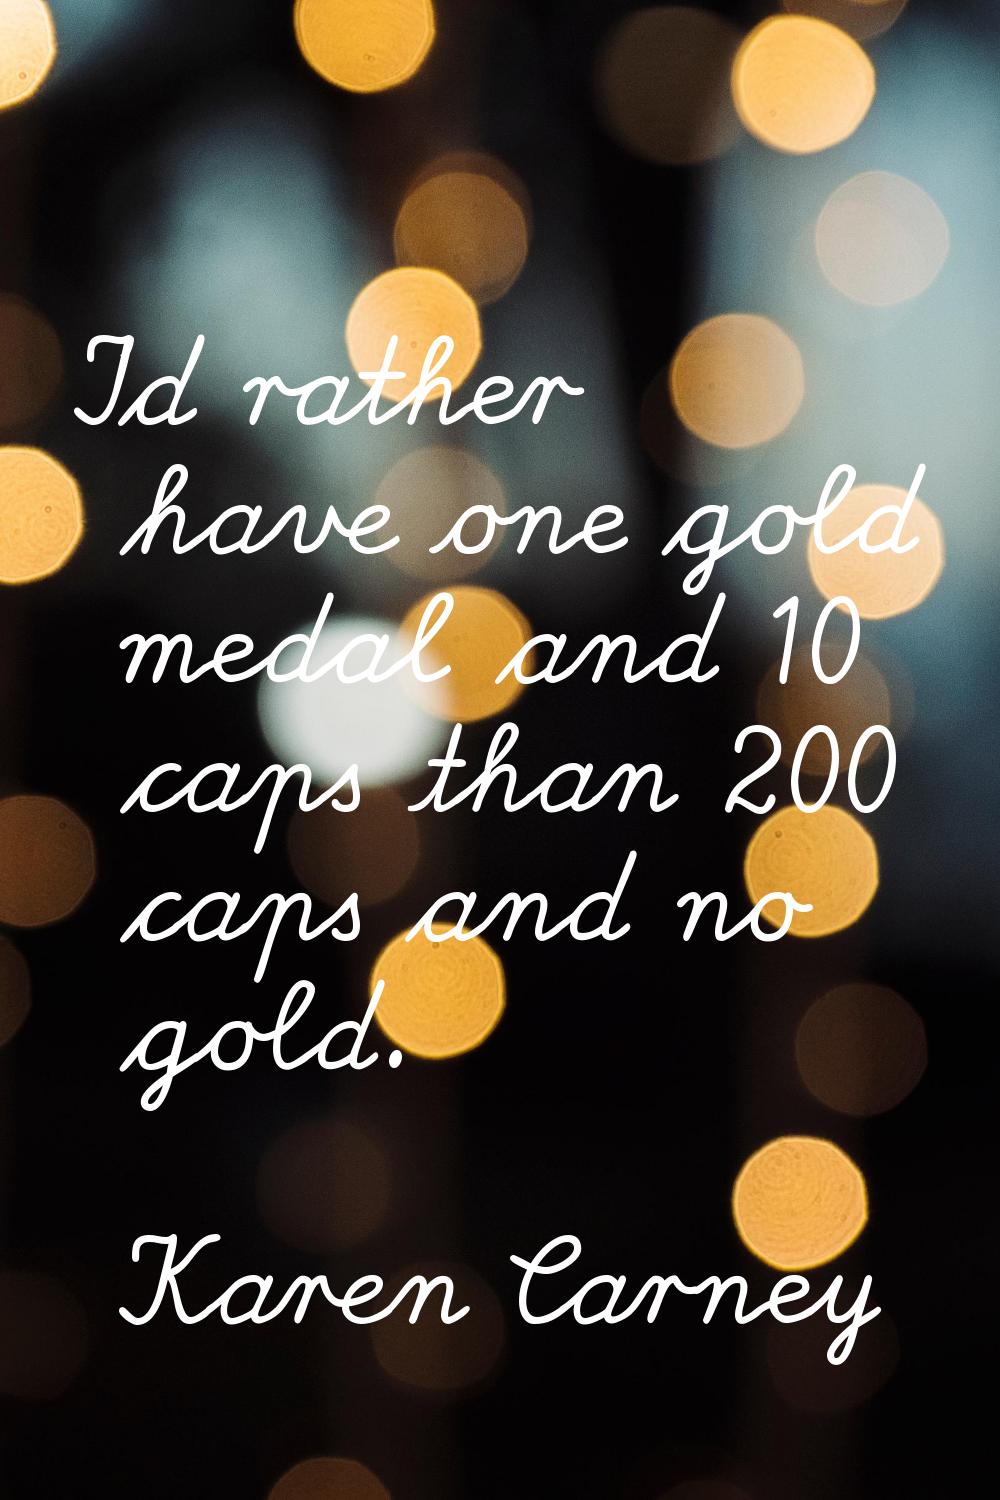 I'd rather have one gold medal and 10 caps than 200 caps and no gold.